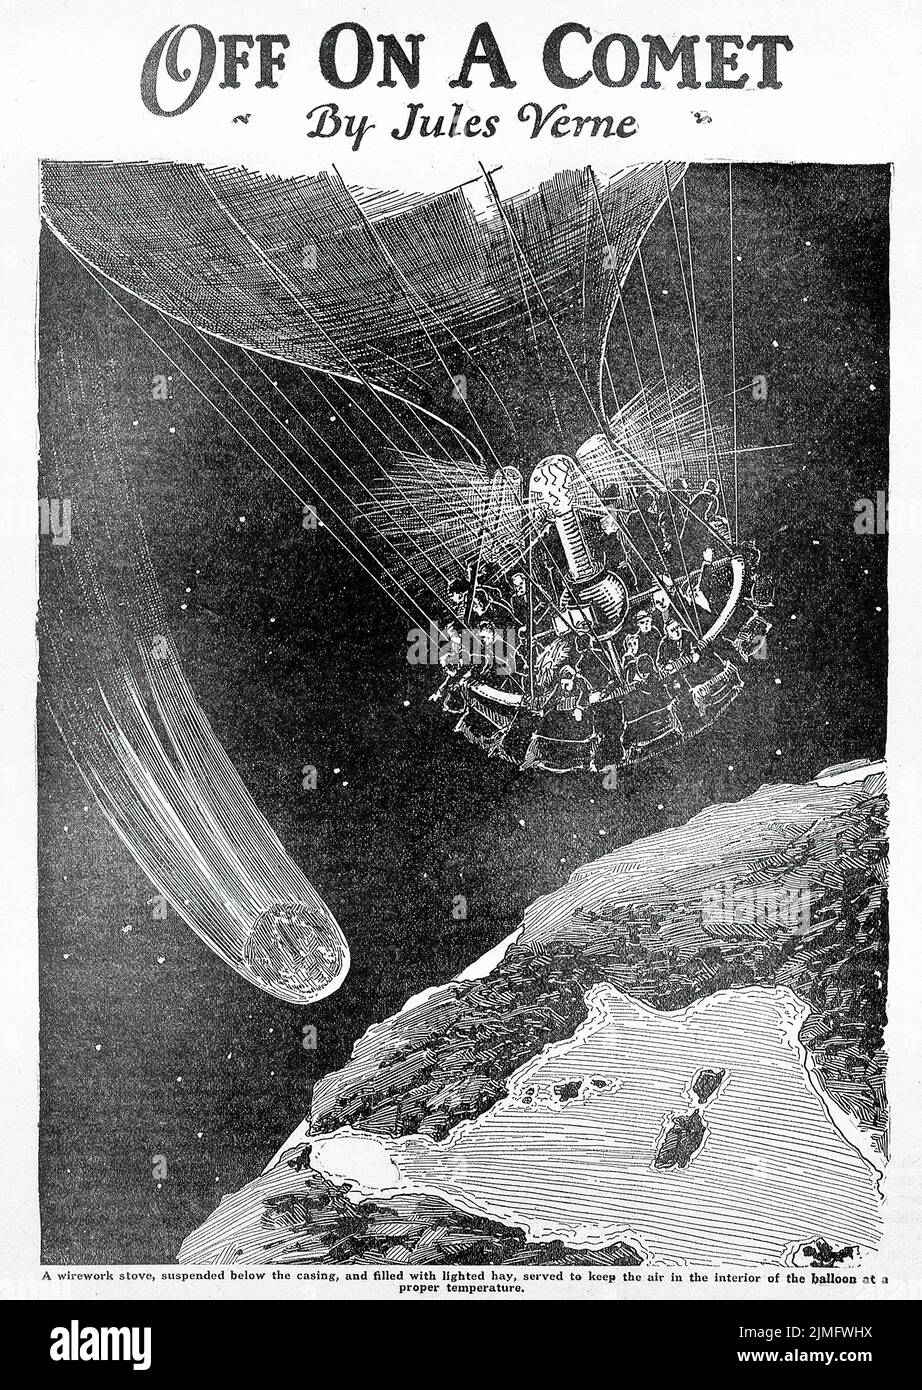 Off on a Comet (1877) by Jules Verne. Illustration by Frank R. Paul from Amazing Stories, May 1926. Stock Photo